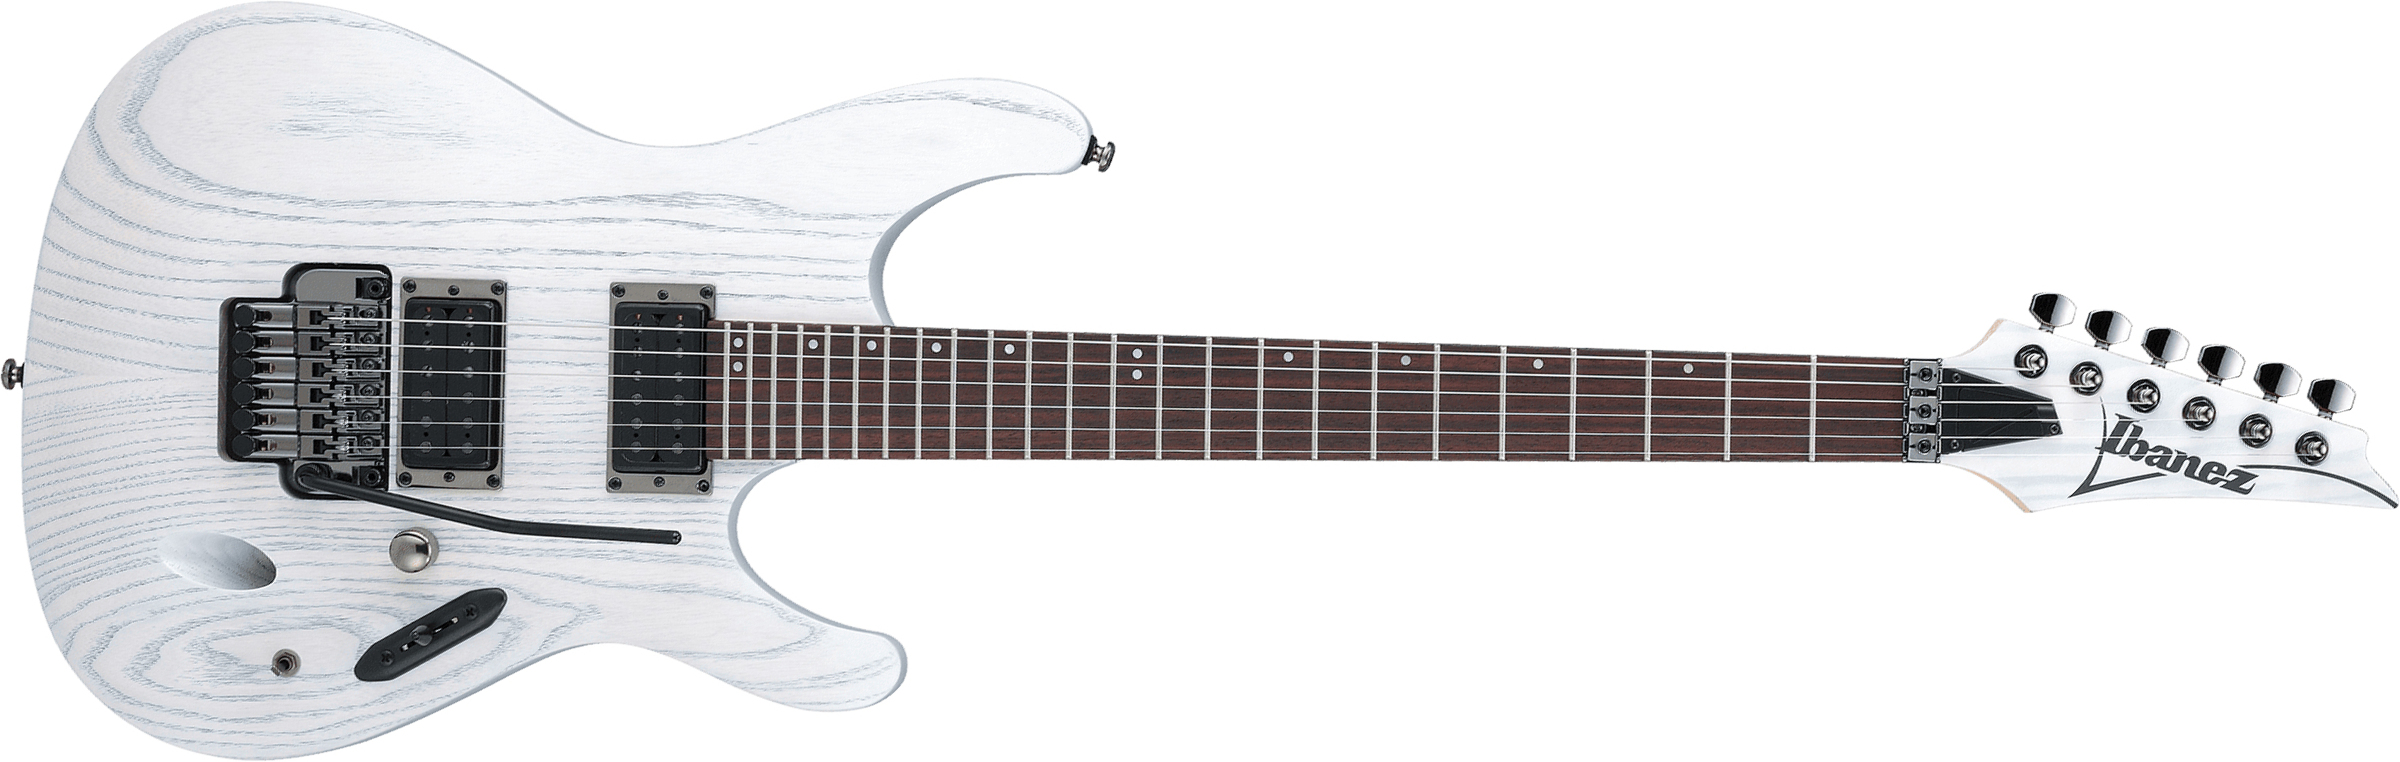 Ibanez Paul Waggoner Pwm20 Signature Hh Fr Rw - White Stain - Str shape electric guitar - Main picture